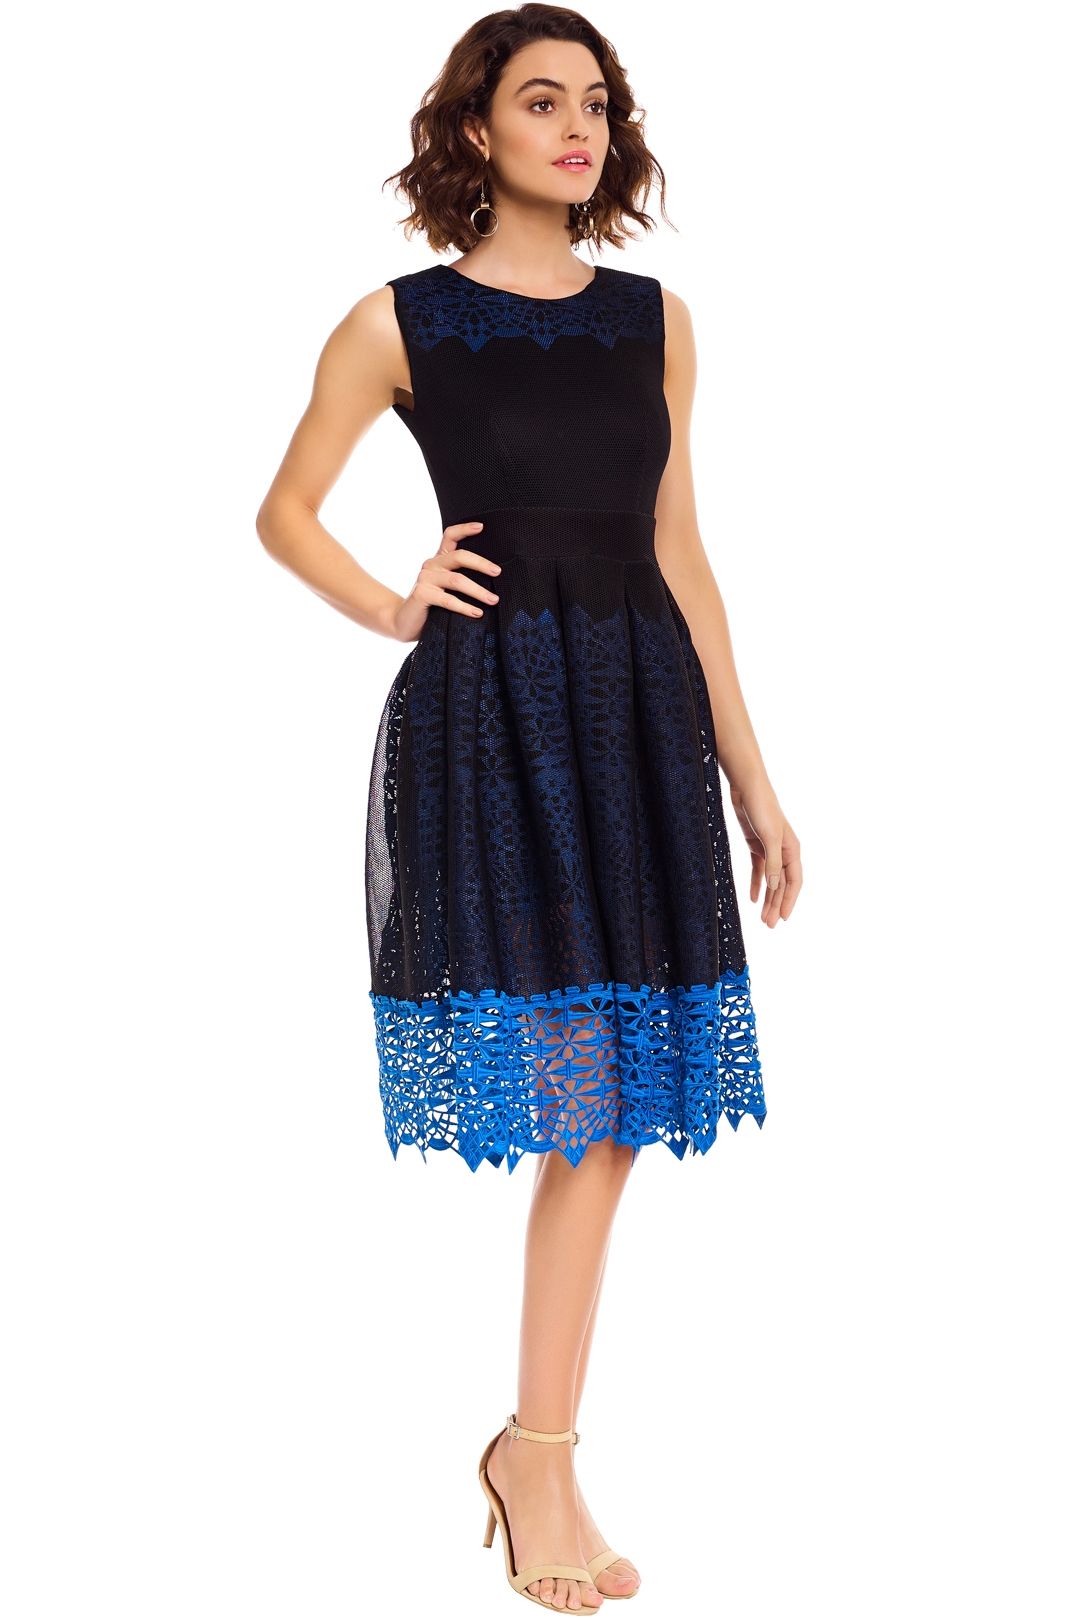 Maje - Russe Honeycomb Knit and Guipure Dress - Navy Blue - Side